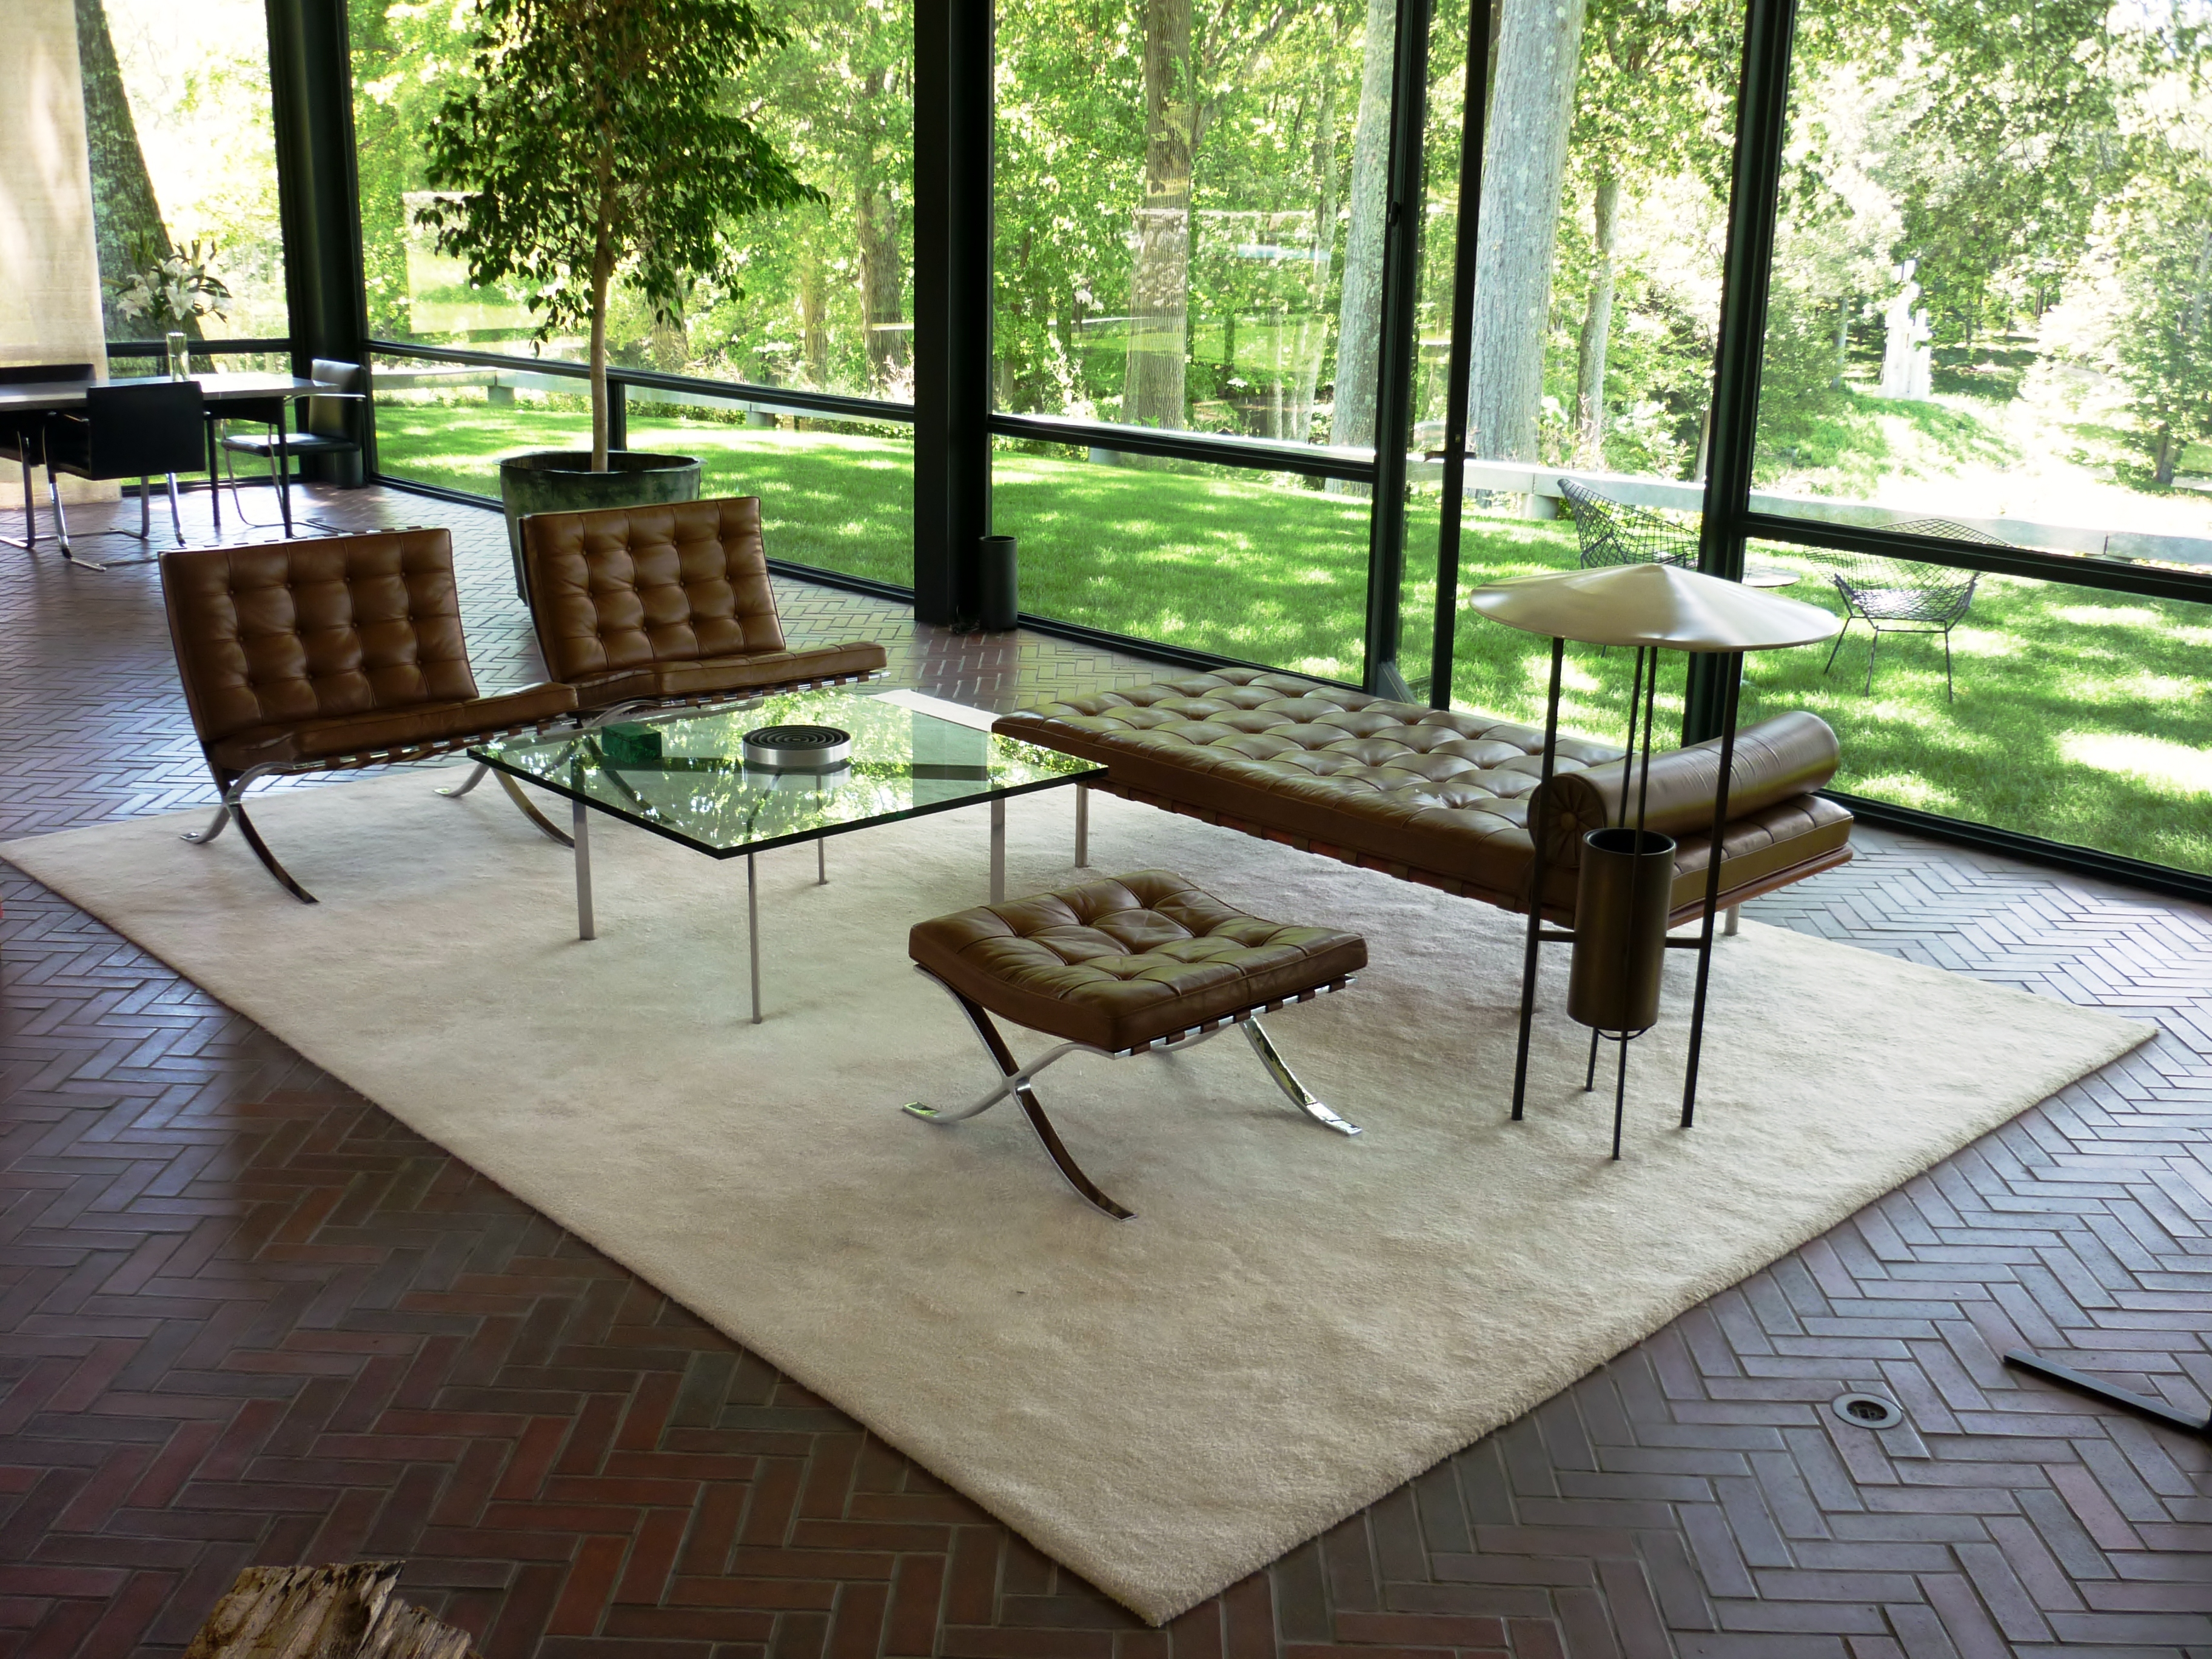 Image of glass house furniture.